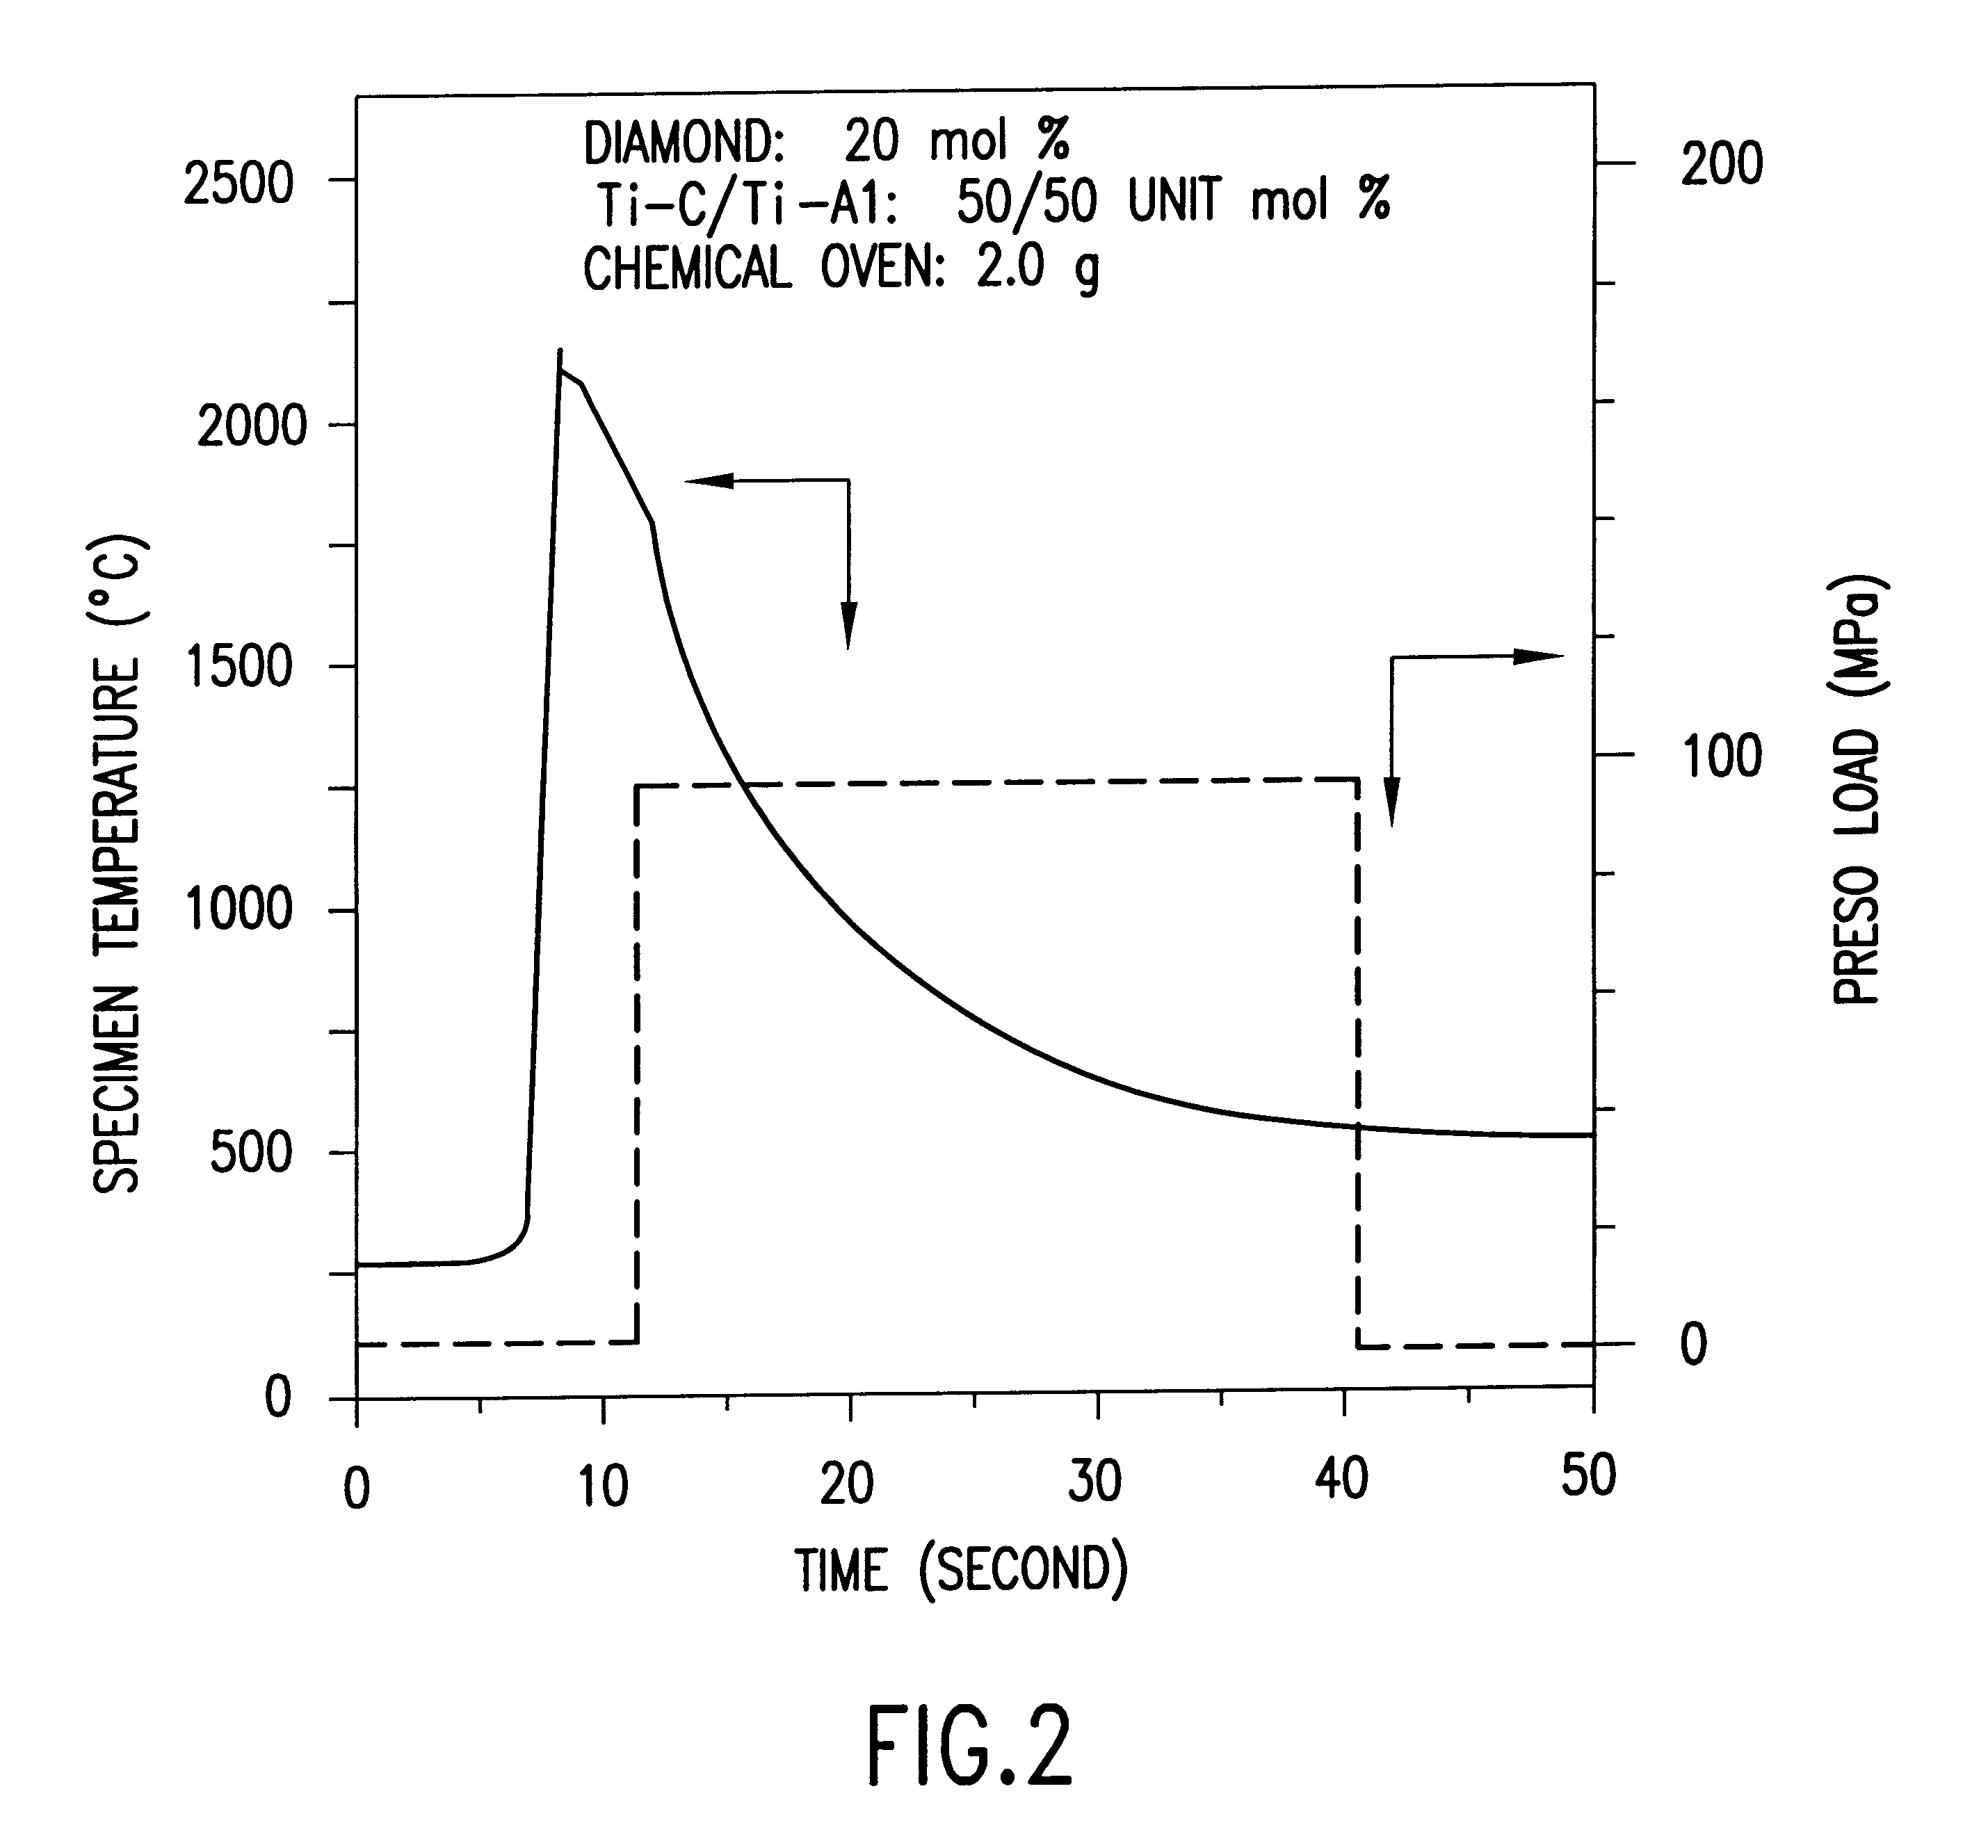 Sintered composites containing superabrasive particles